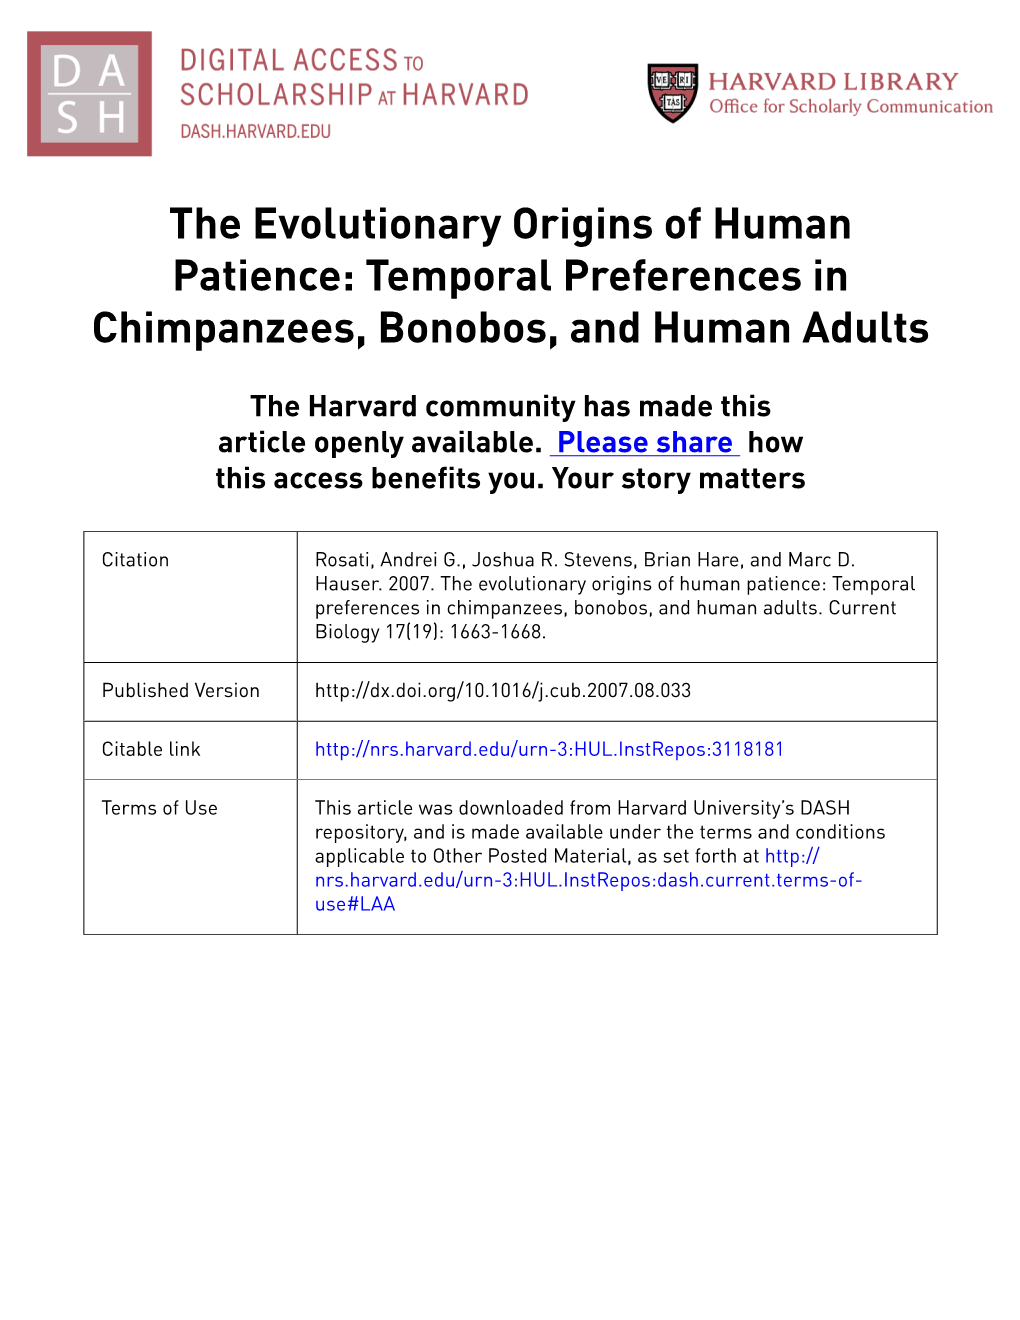 The Evolutionary Origins of Human Patience: Temporal Preferences in Chimpanzees, Bonobos, and Human Adults